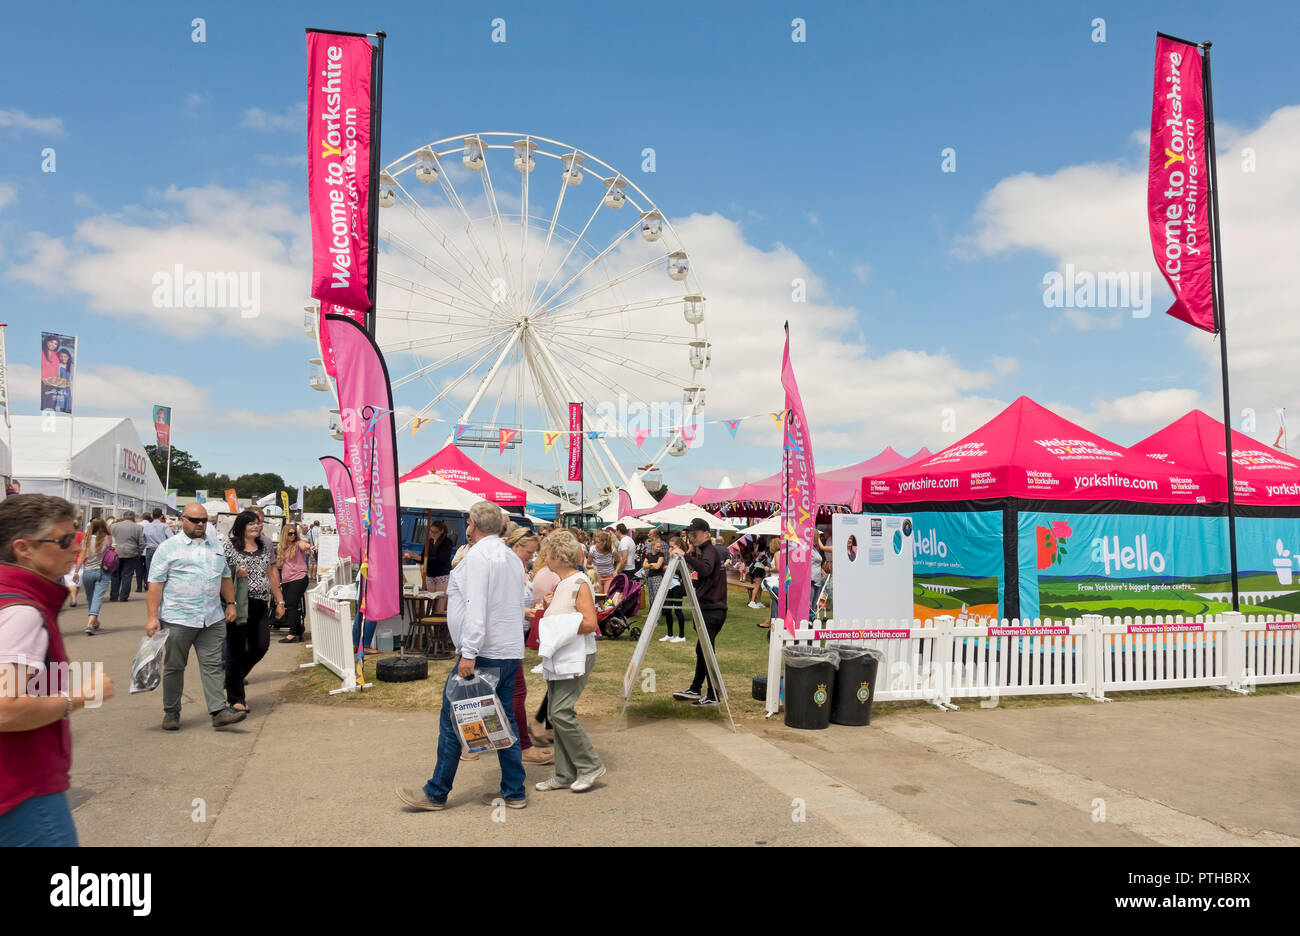 Welcome to Yorkshire stand Great Yorkshire Show in summer Harrogate North Yorkshire England UK United Kingdom GB Great Britain Stock Photo